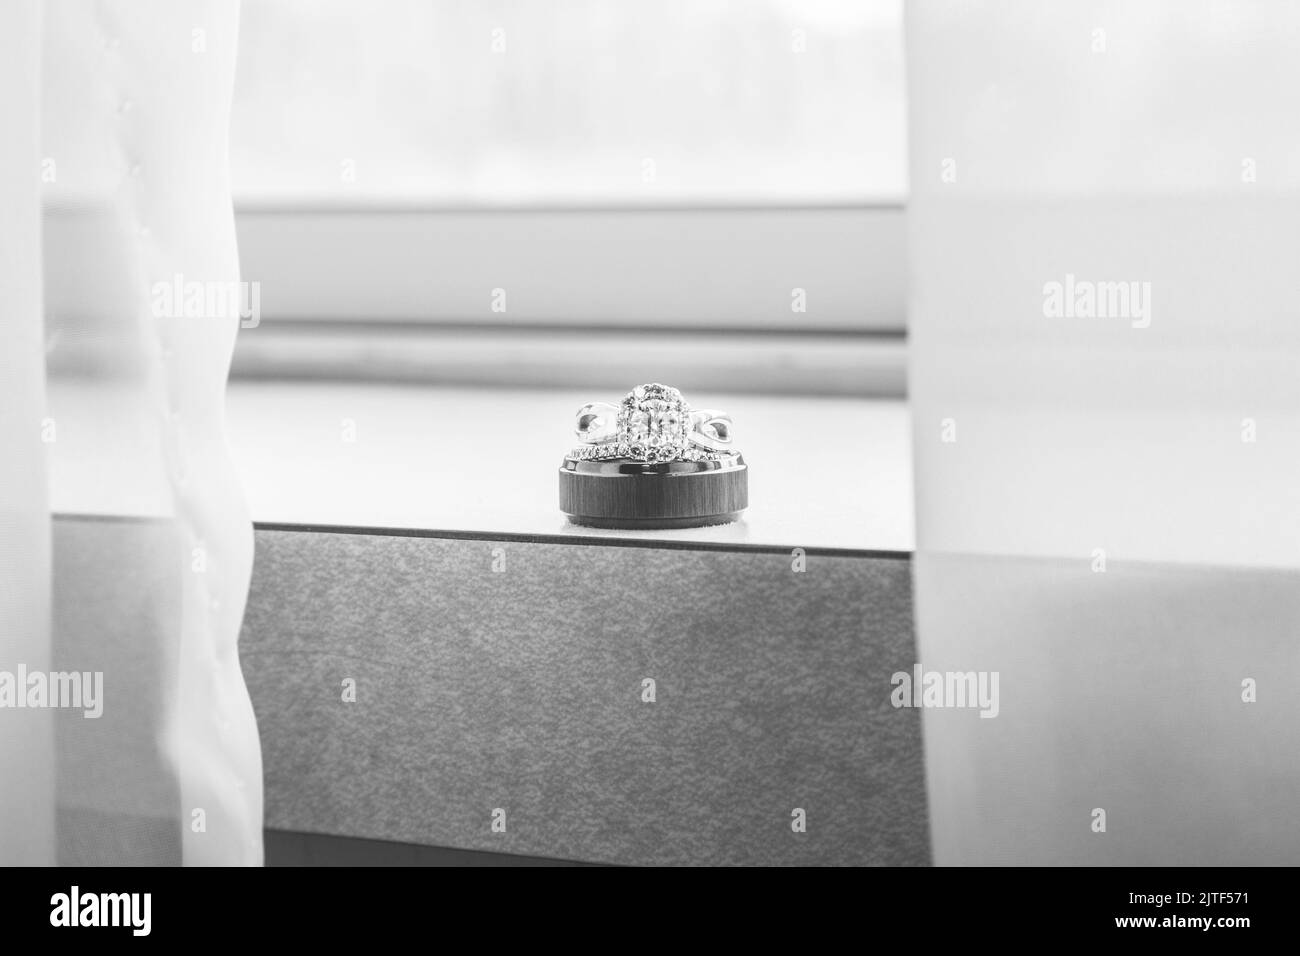 Male and female wedding rings stacked on a window ledge with sheer curtains. Stock Photo